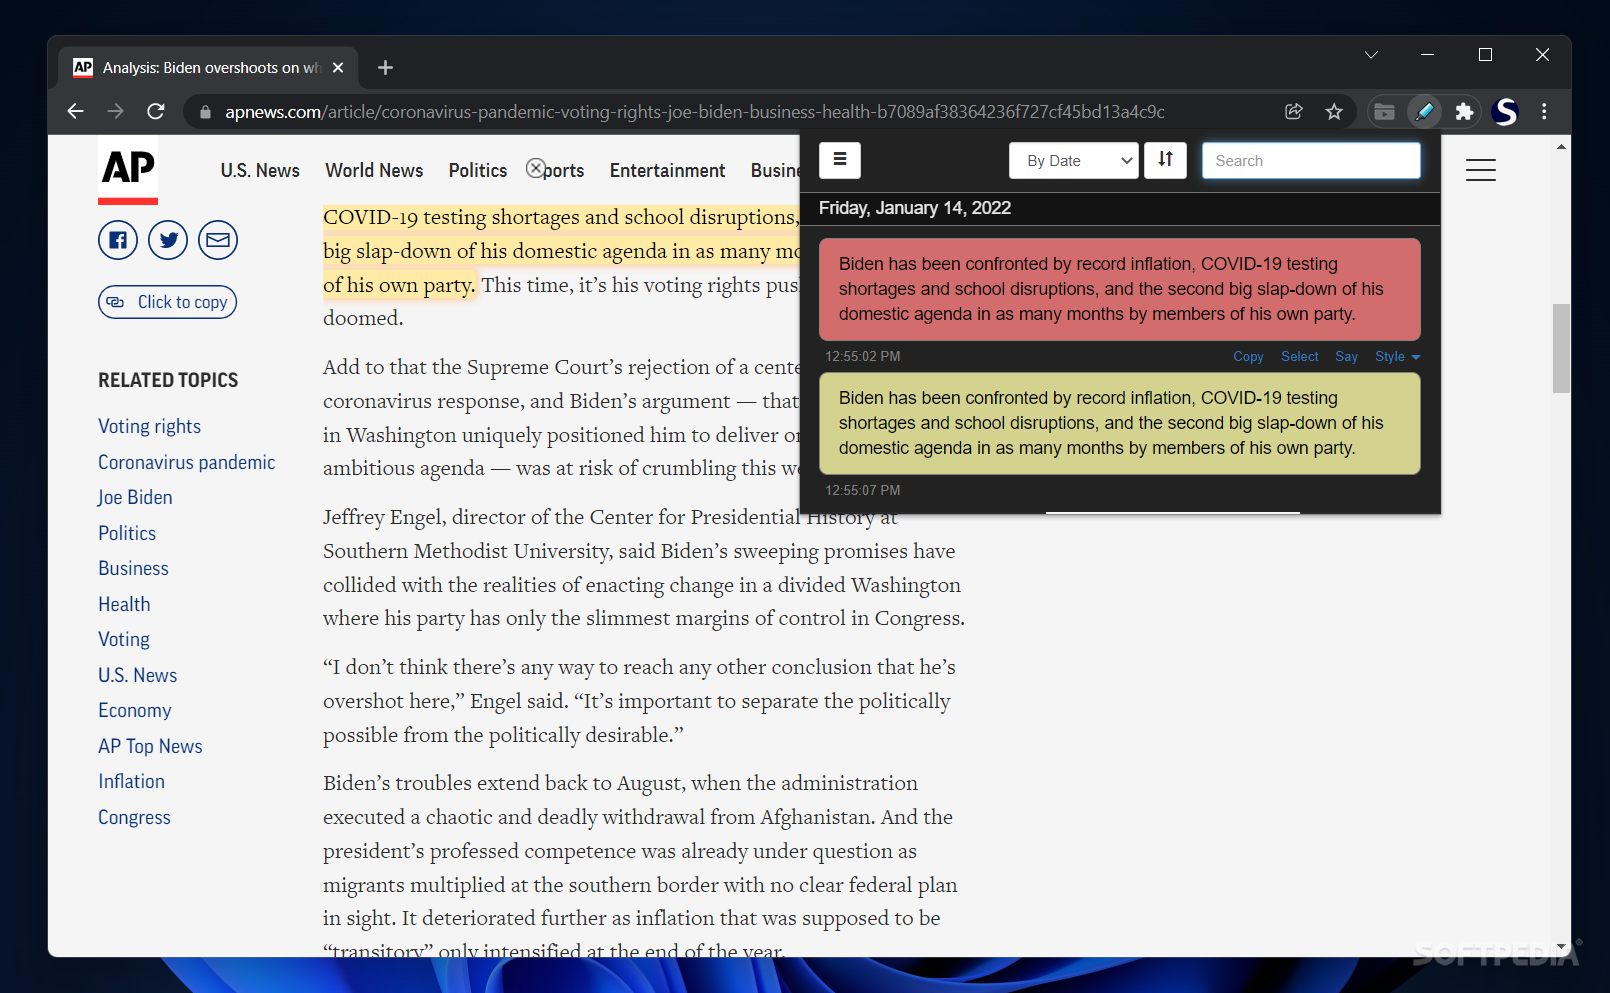 Super Simple Highlighter Chrome (Windows) - Download & Review